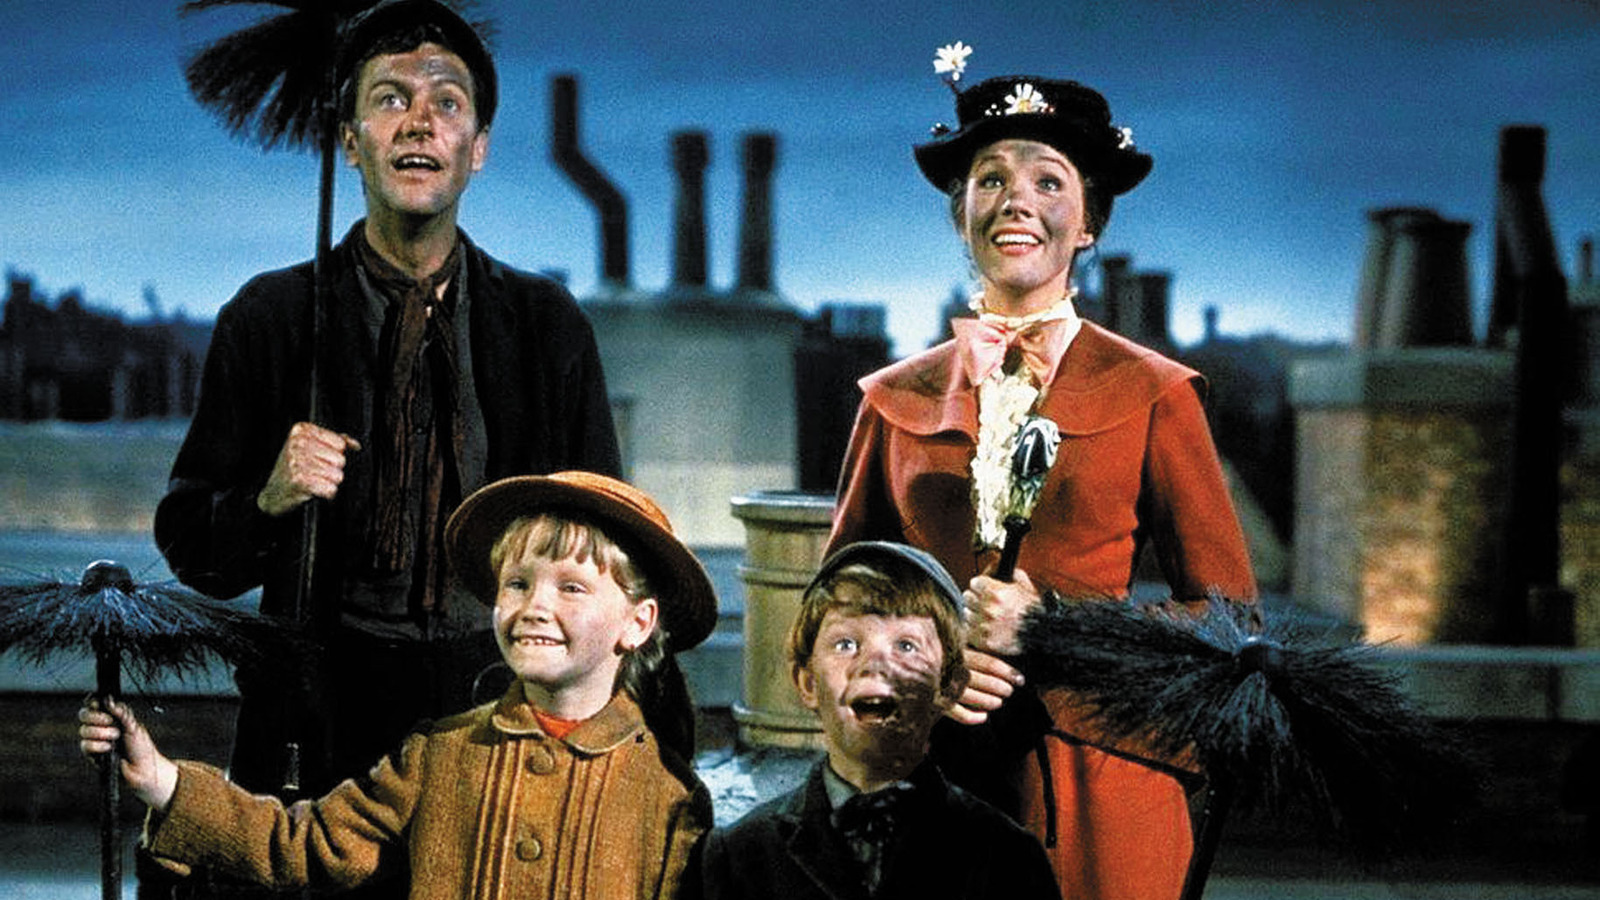 The only surviving major actors from Mary Poppins